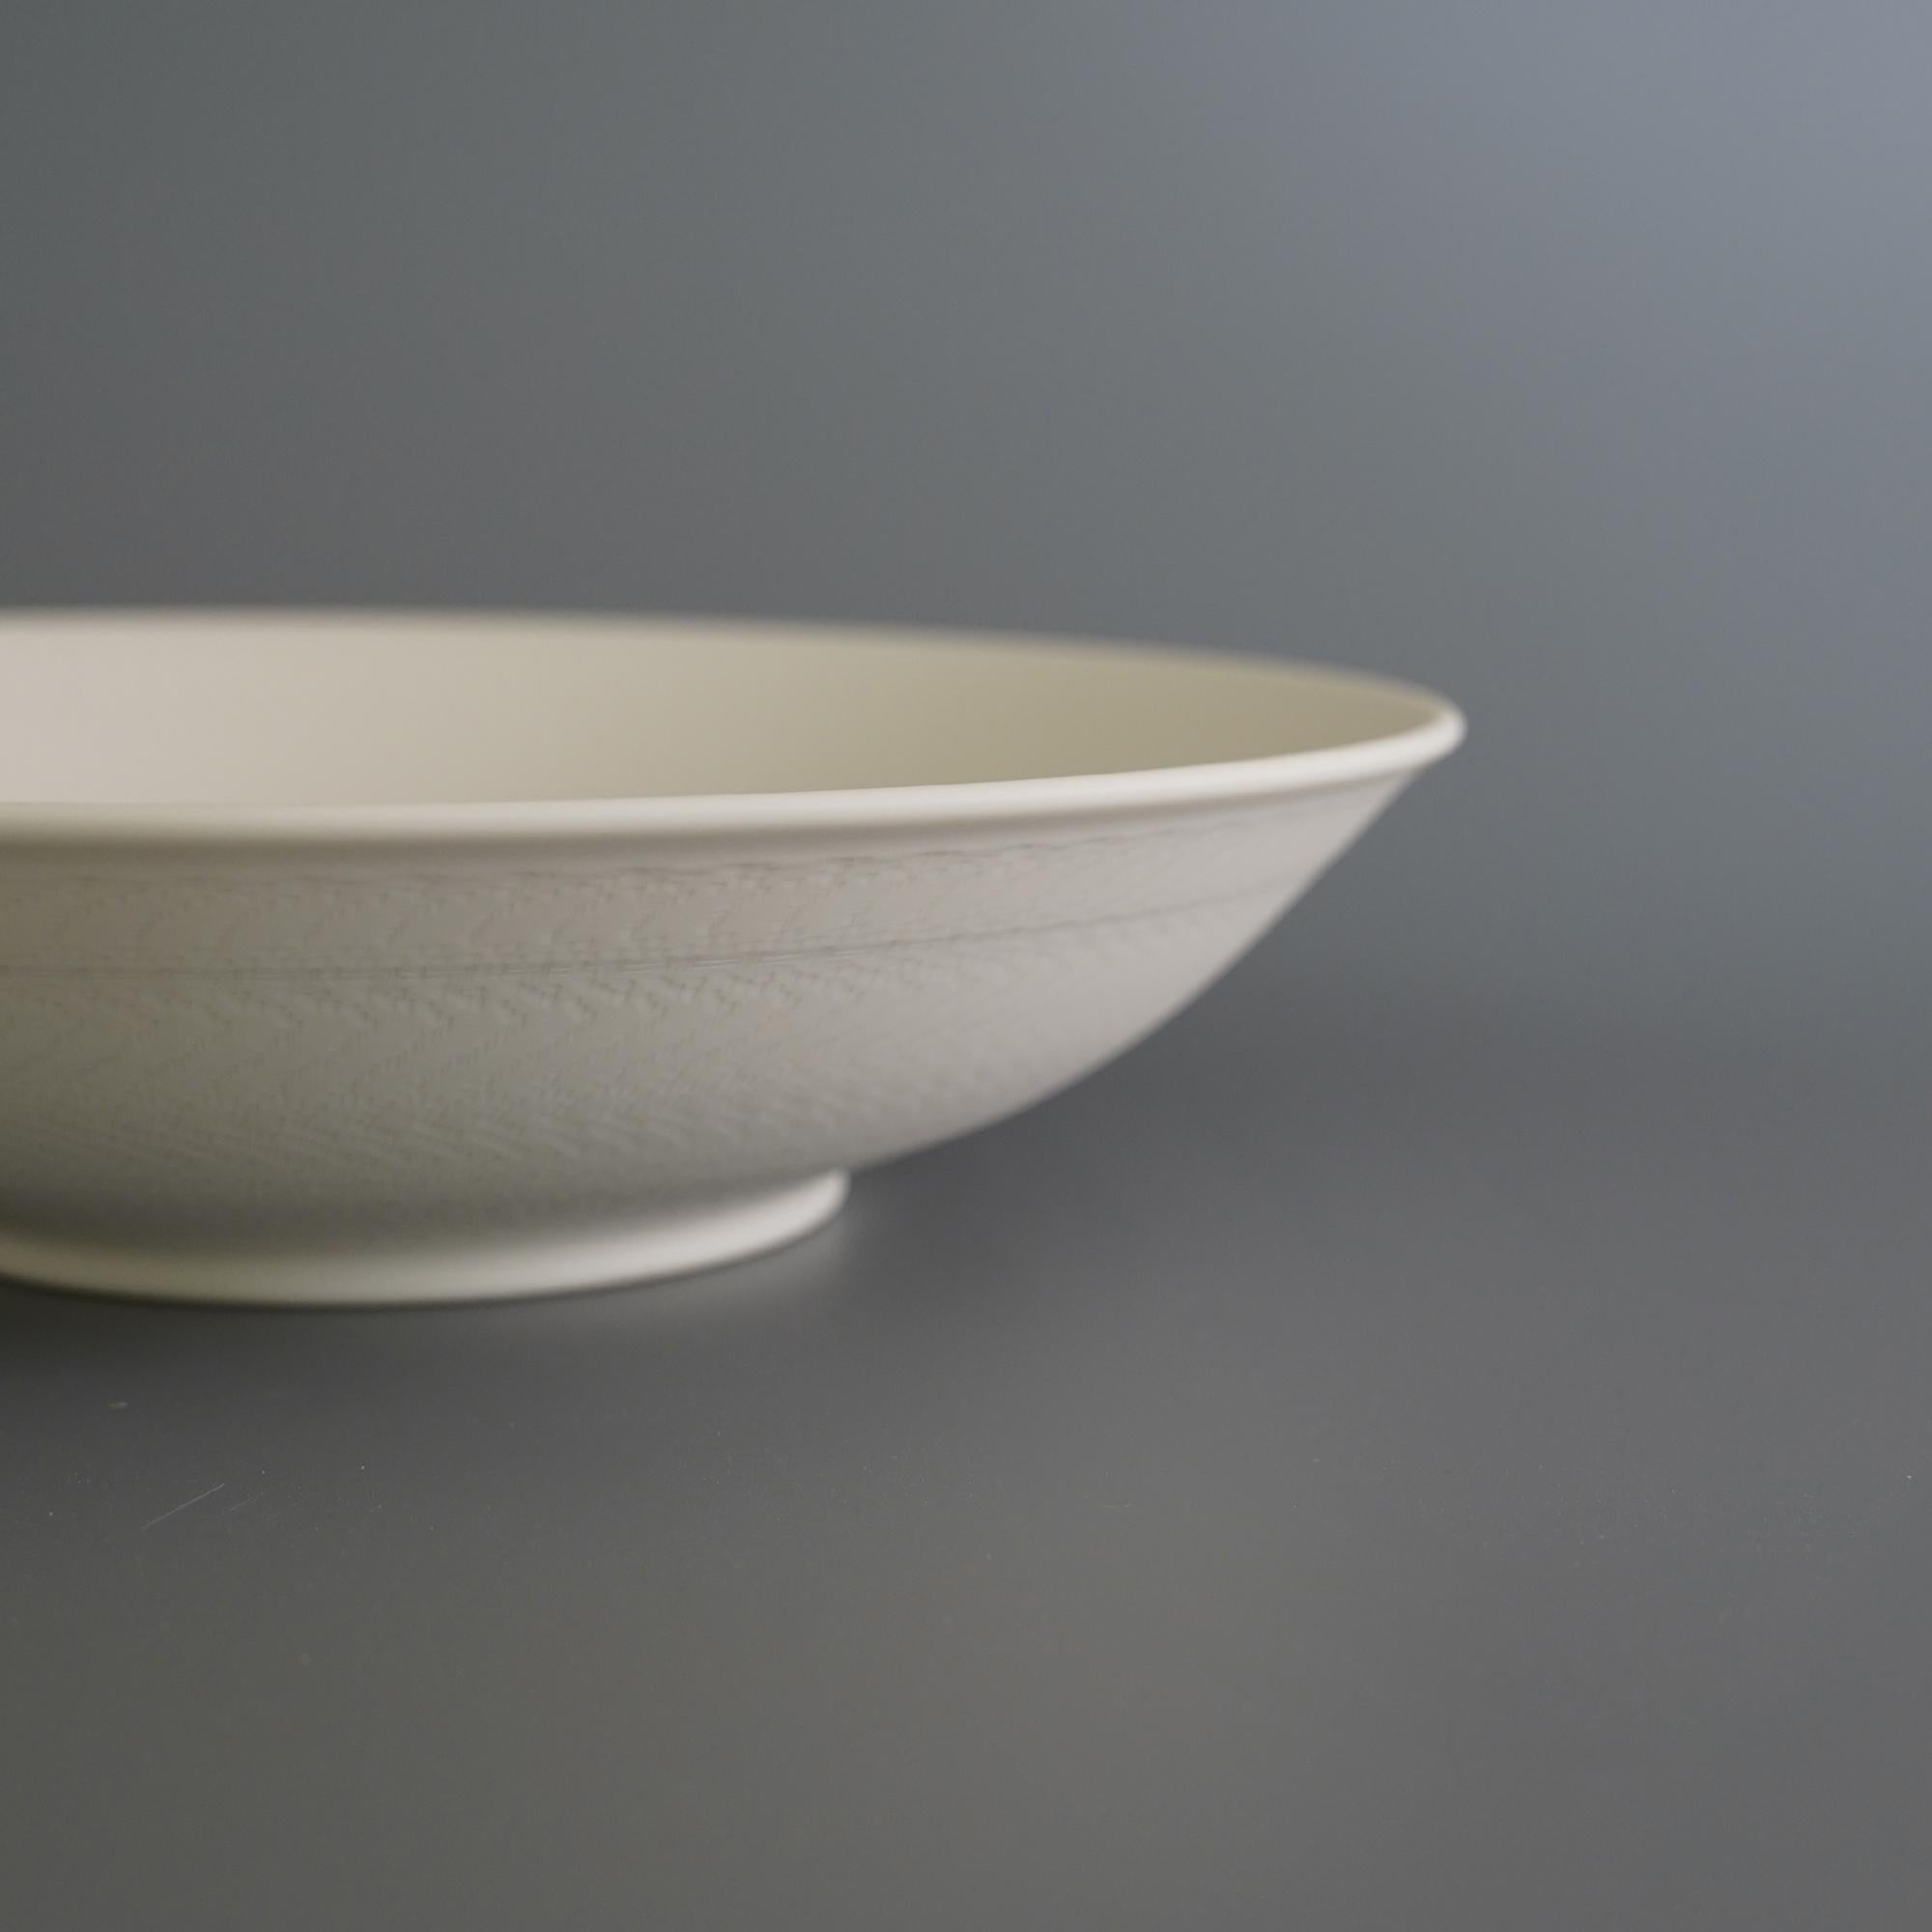 Other Set of 2 Helice Fruit Bowls by Studio Cúze